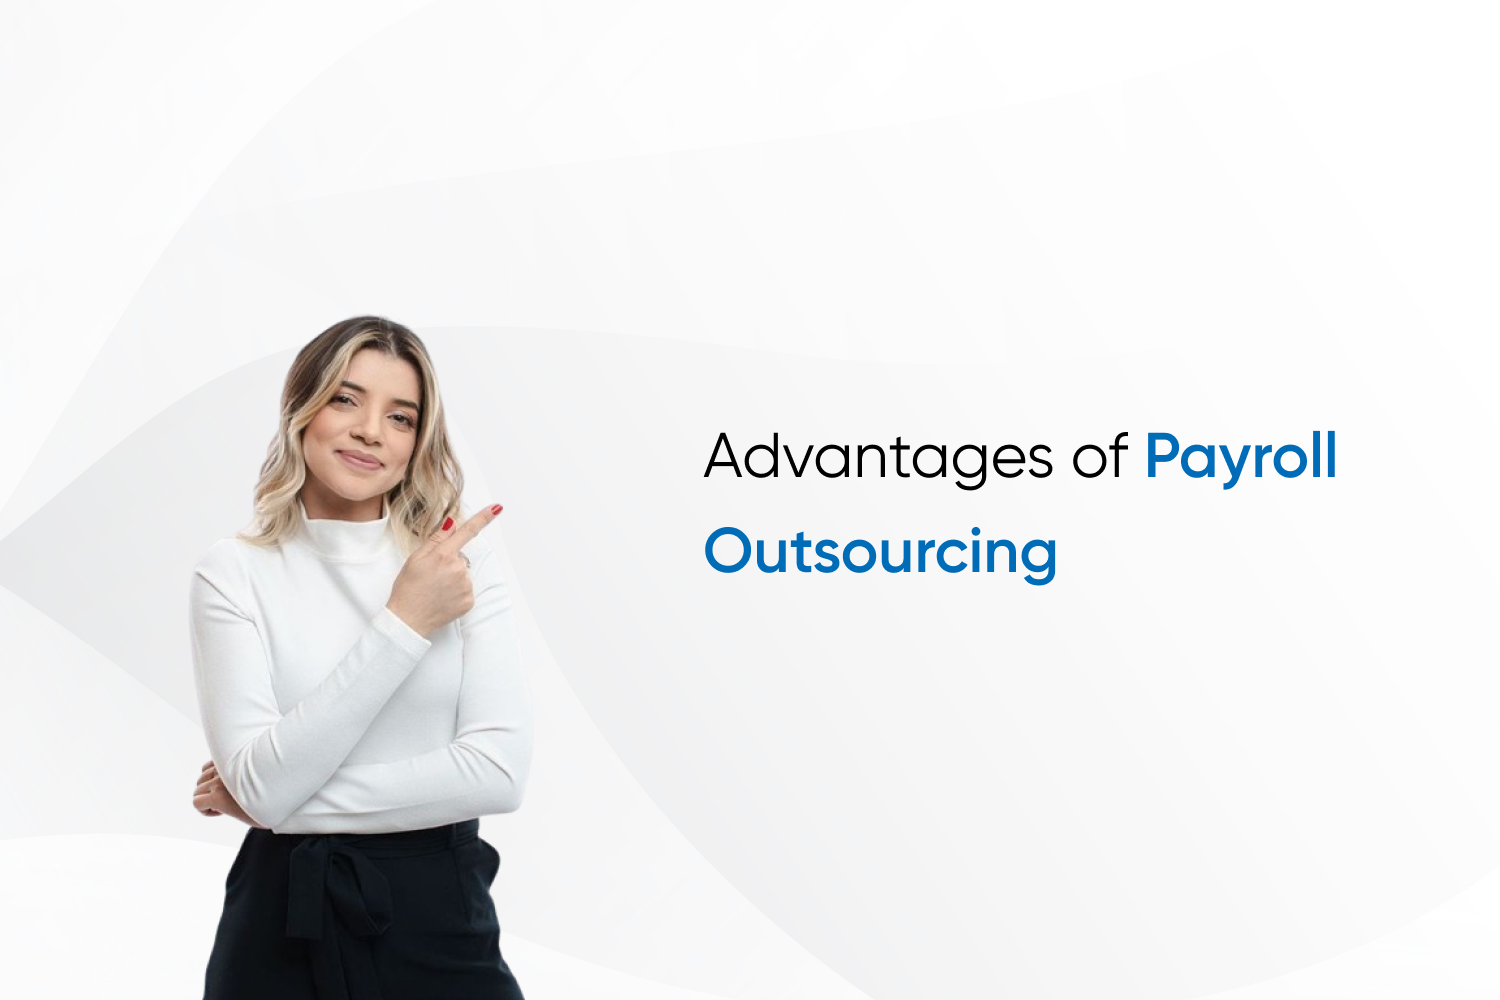 Advantages of Payroll Outsourcing